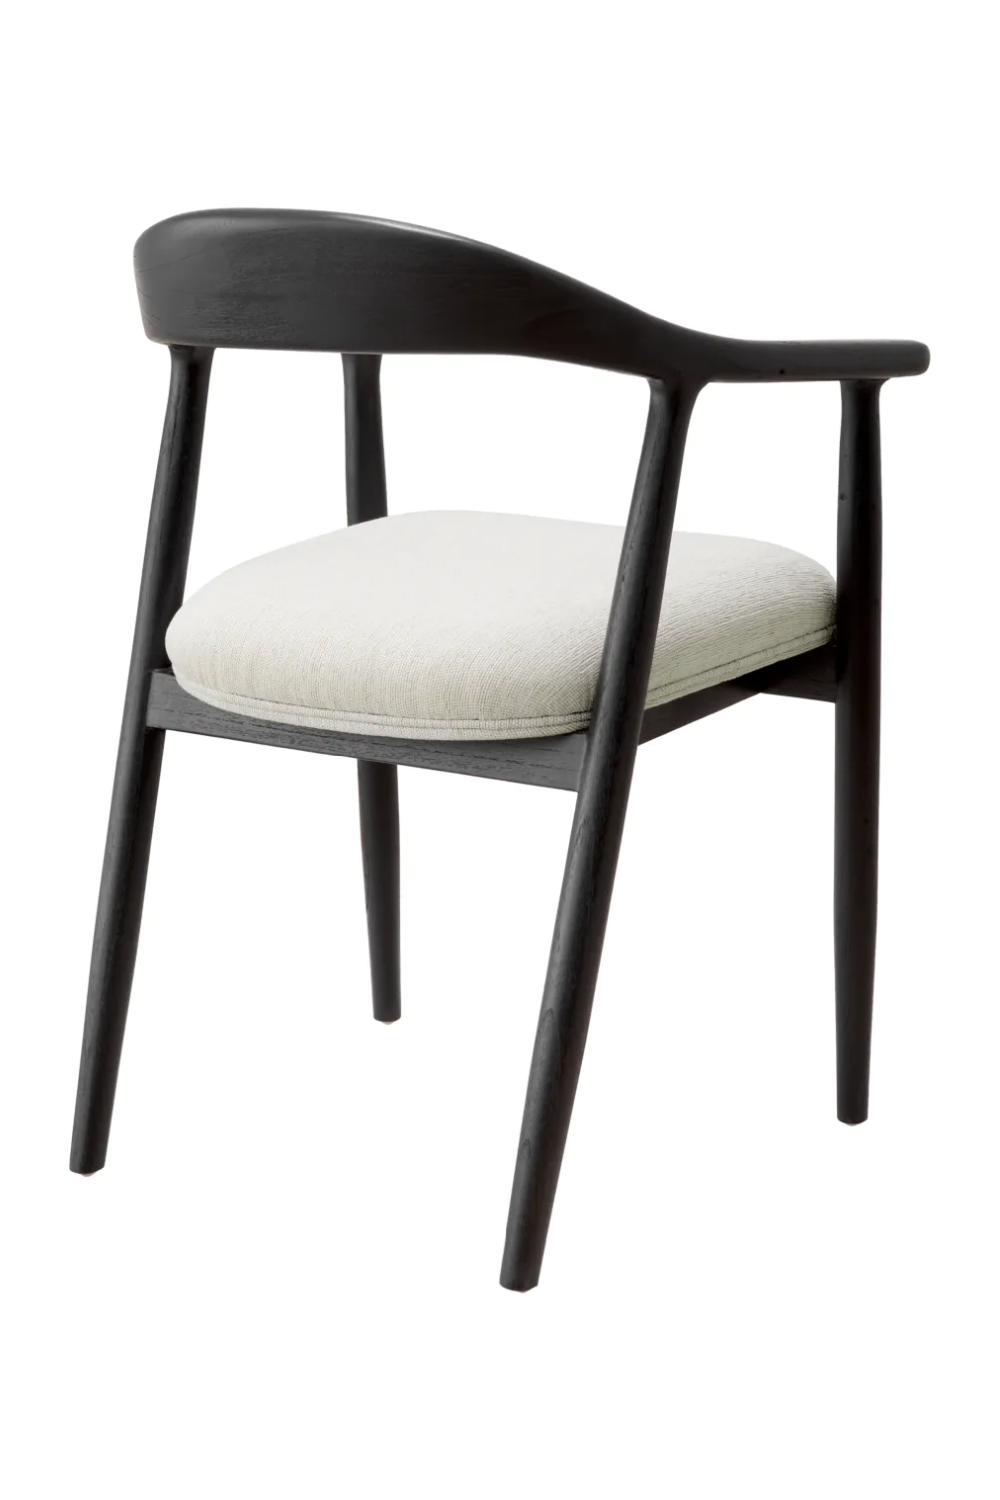 Black Curved Dining Chair | Eichholtz Beale | Oroa.com